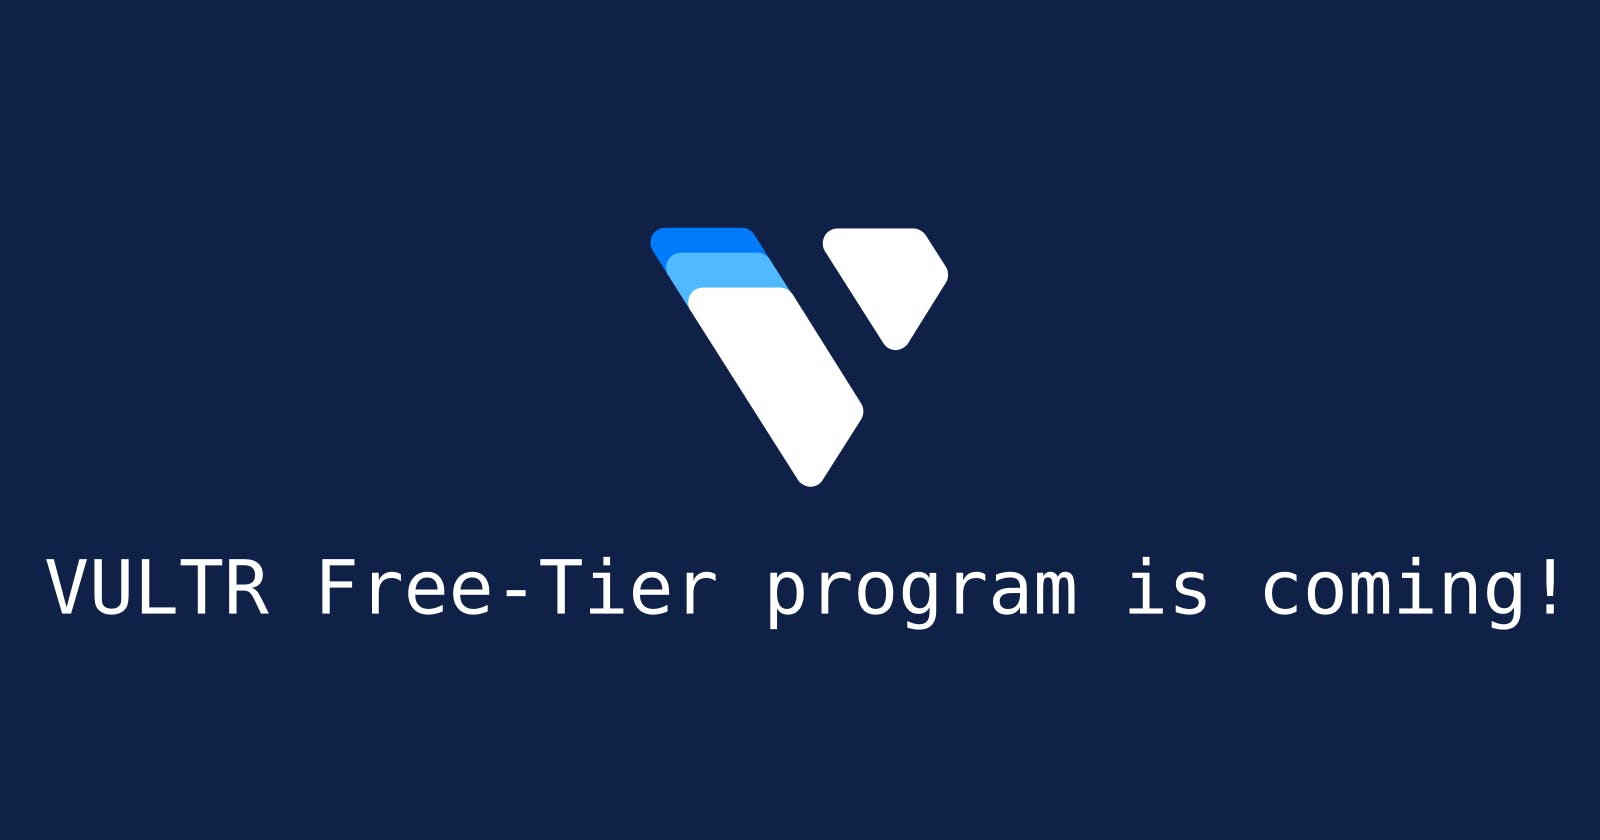 Vultr is introducing the "free-tier" program